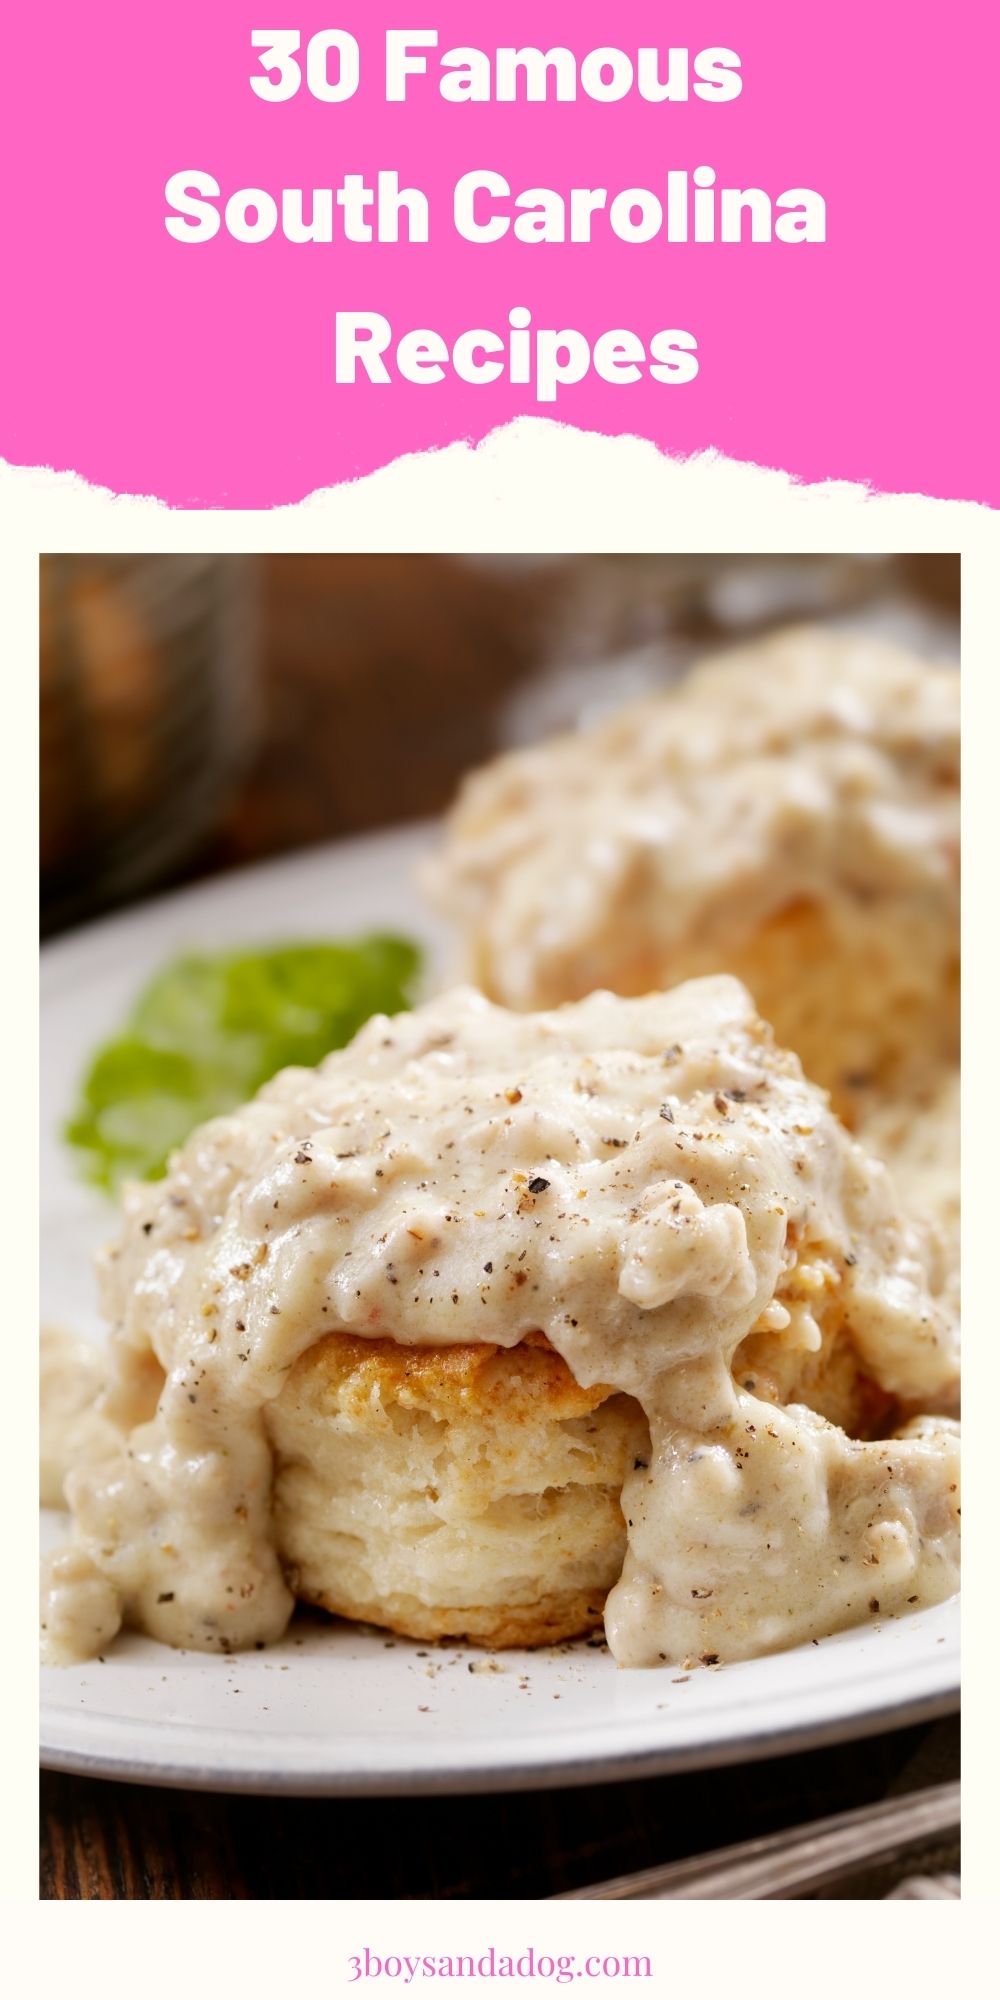 extra pin with an image of biscuits and gravy for famous South Carolina recipes